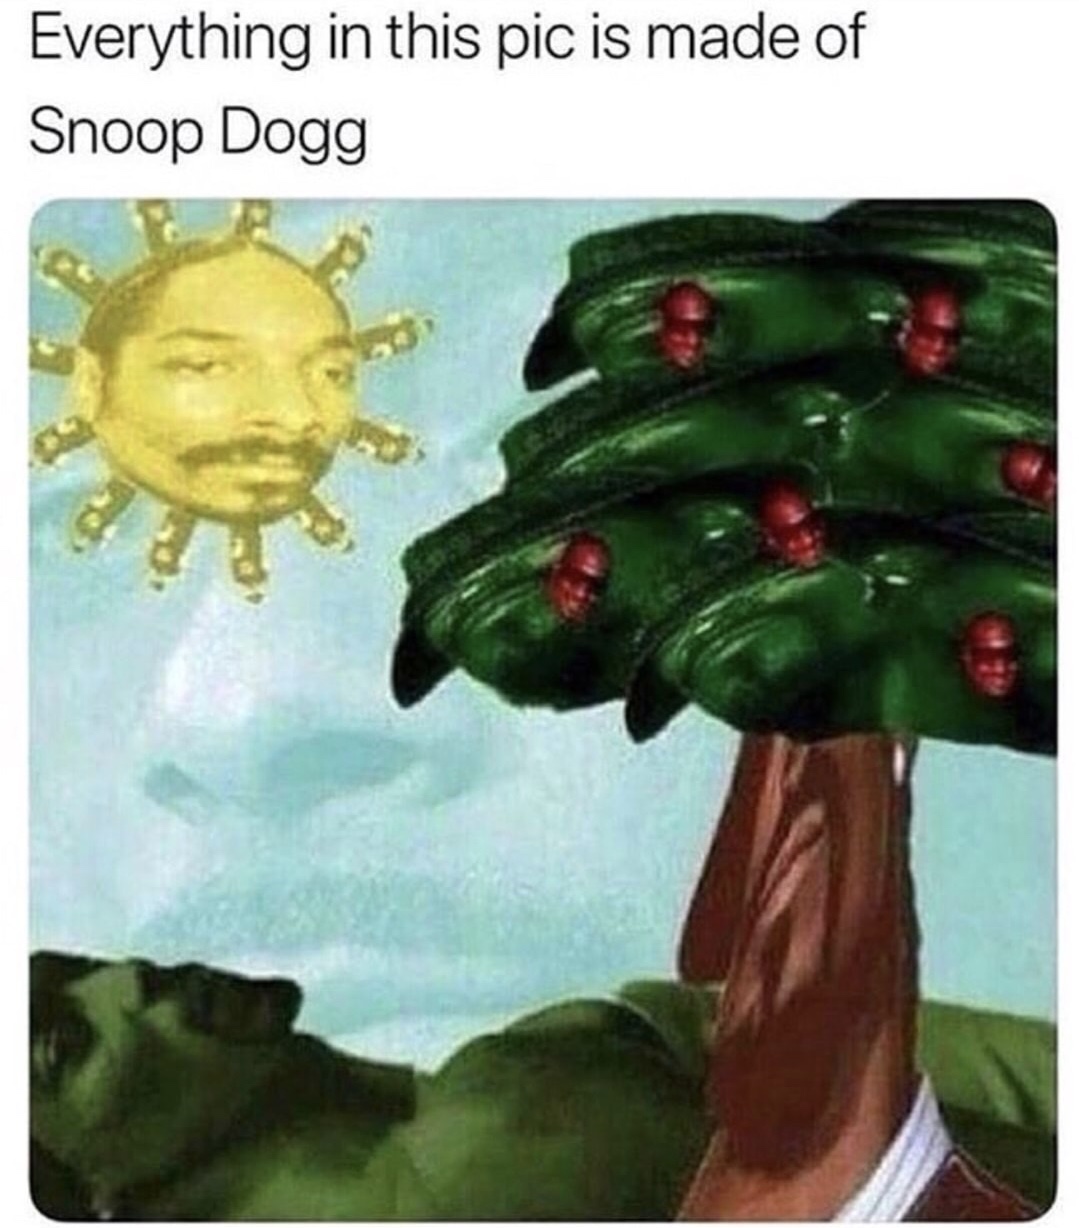 picture in which everything is snoop dog